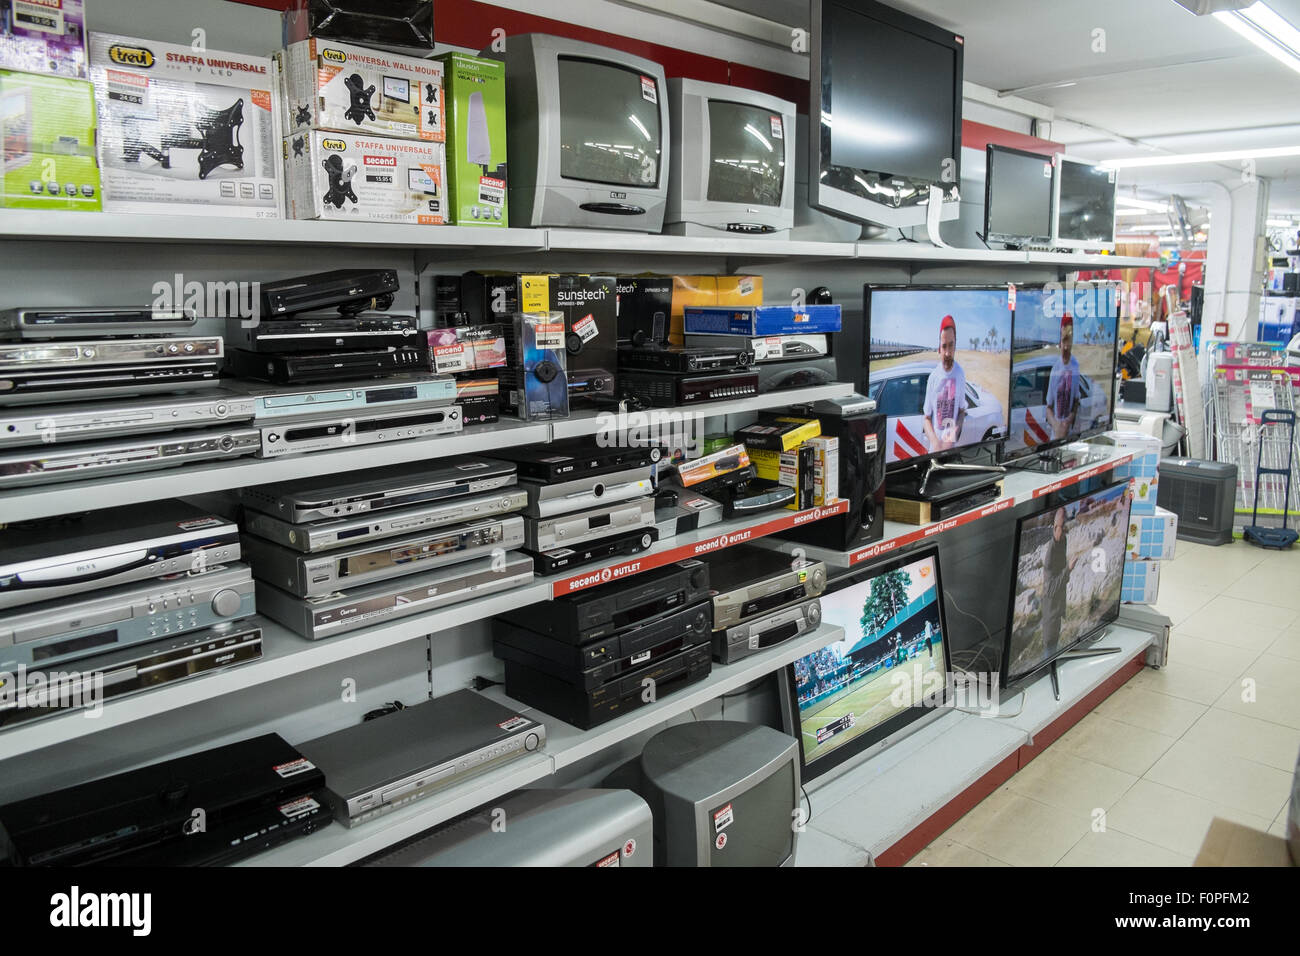 Televisions,TV,audio,visual items,Second hand goods for sale at this  "Seconds" shop in Terrassa, near Barcelona,Catalonia,Spain Stock Photo -  Alamy